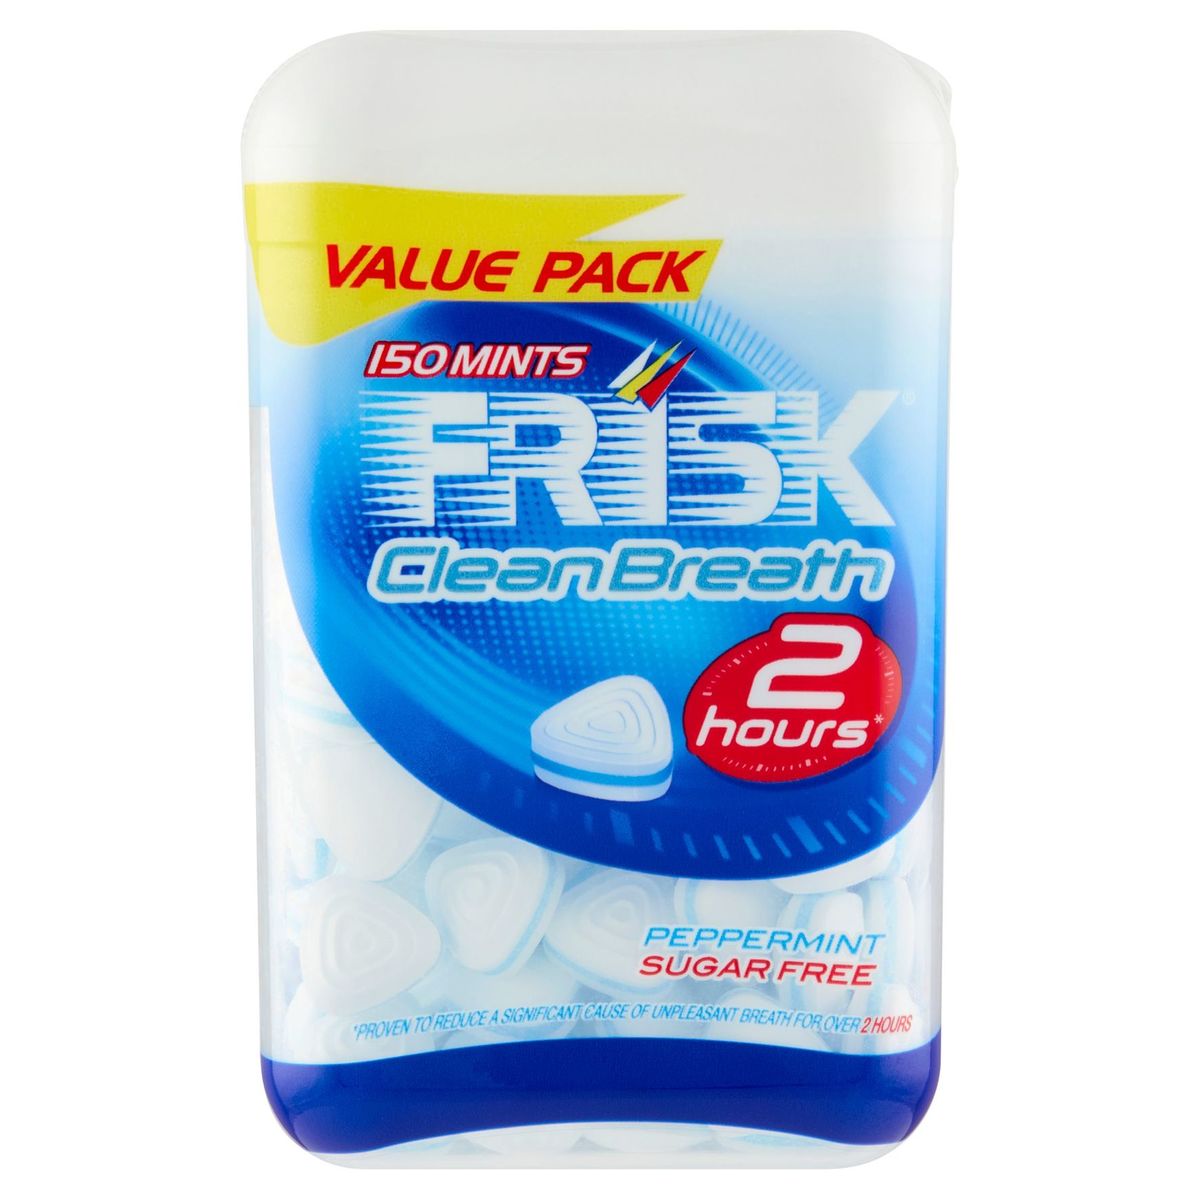 Frisk Clean Breath Peppermint Sugarfree Value Pack 150 Mints 105 g